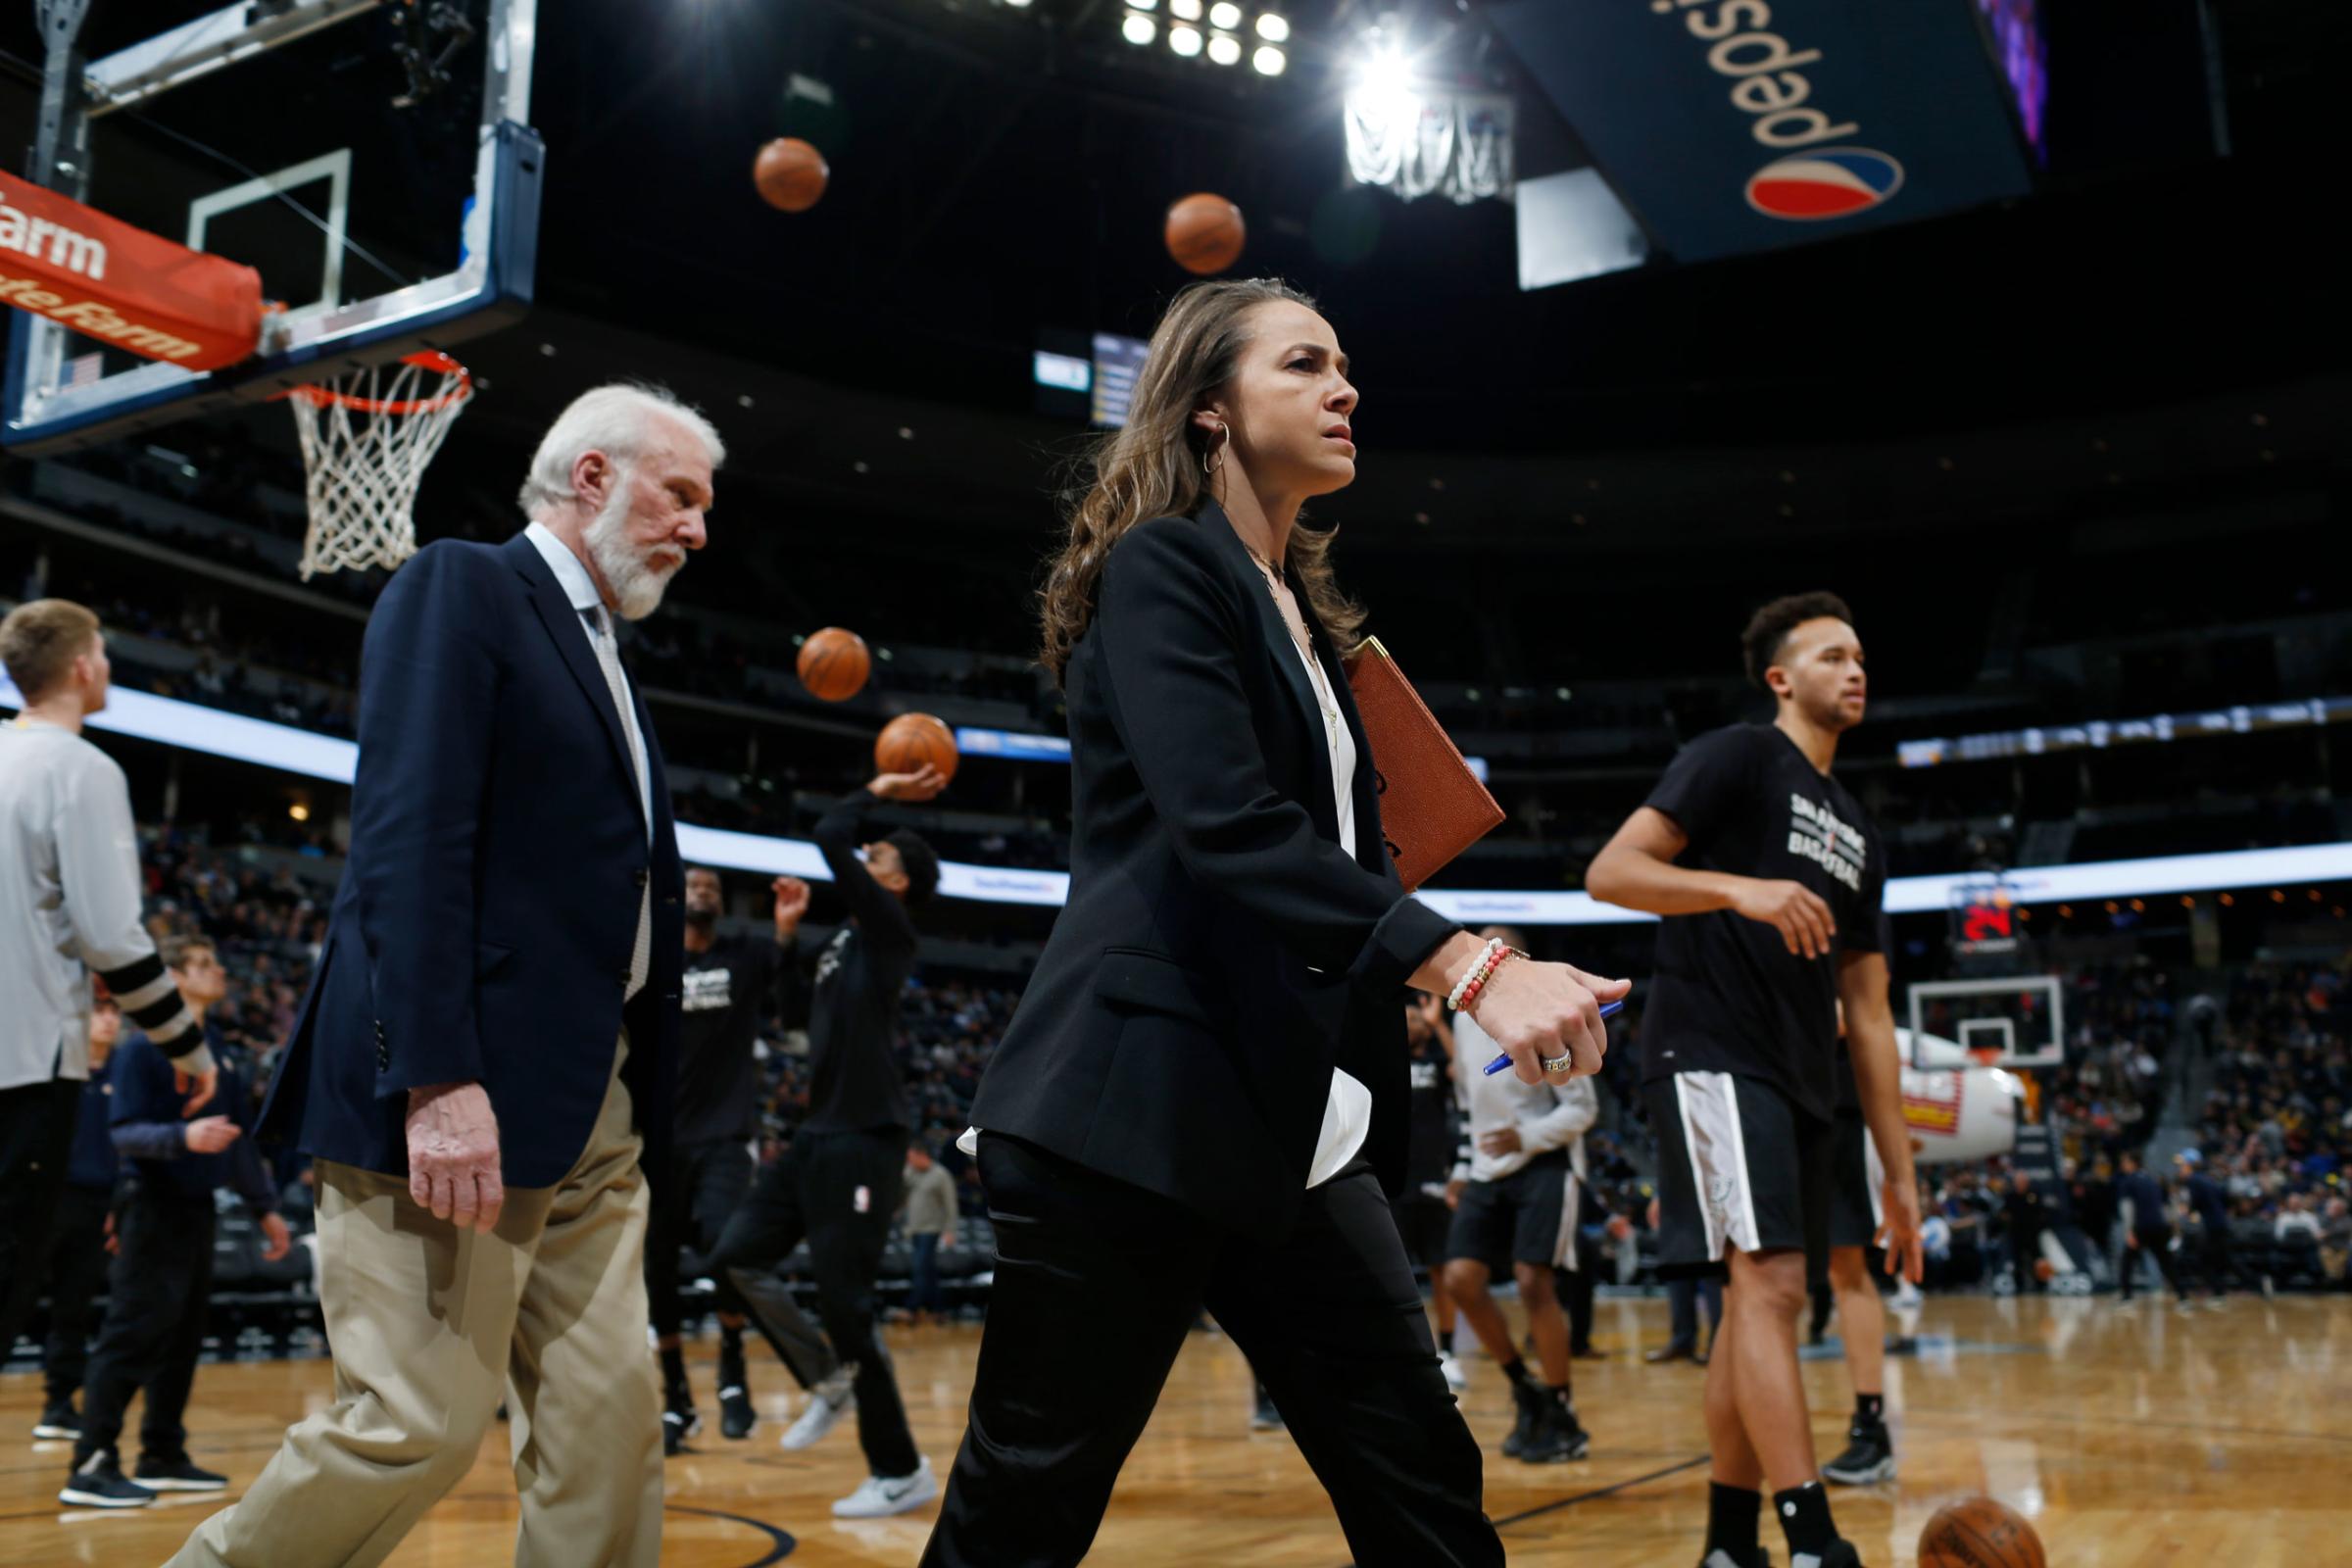 Assistant coach Becky Hammon and head coach Gregg Popovich in the court during a San Antonio Spurs game in 2017.